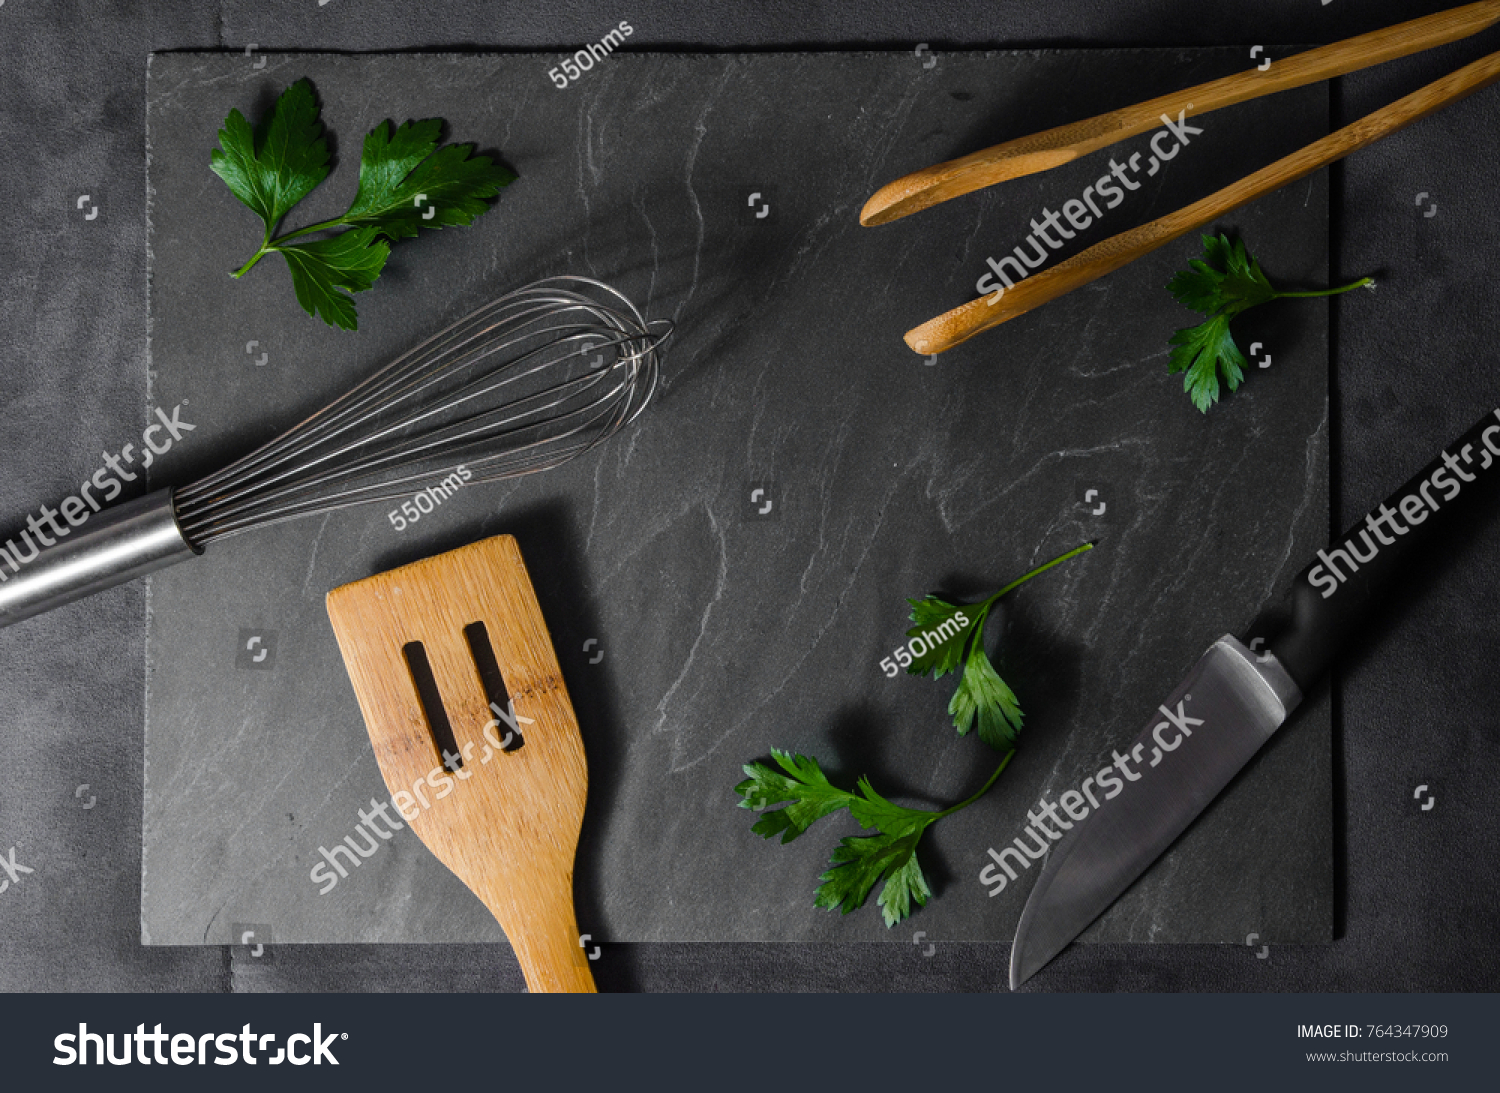 Kitchen utensils layout with fresh green parsley leaves on dark grey stone background. Can be used for advertising, menus, brochures, food blogs. Studio lighting #764347909